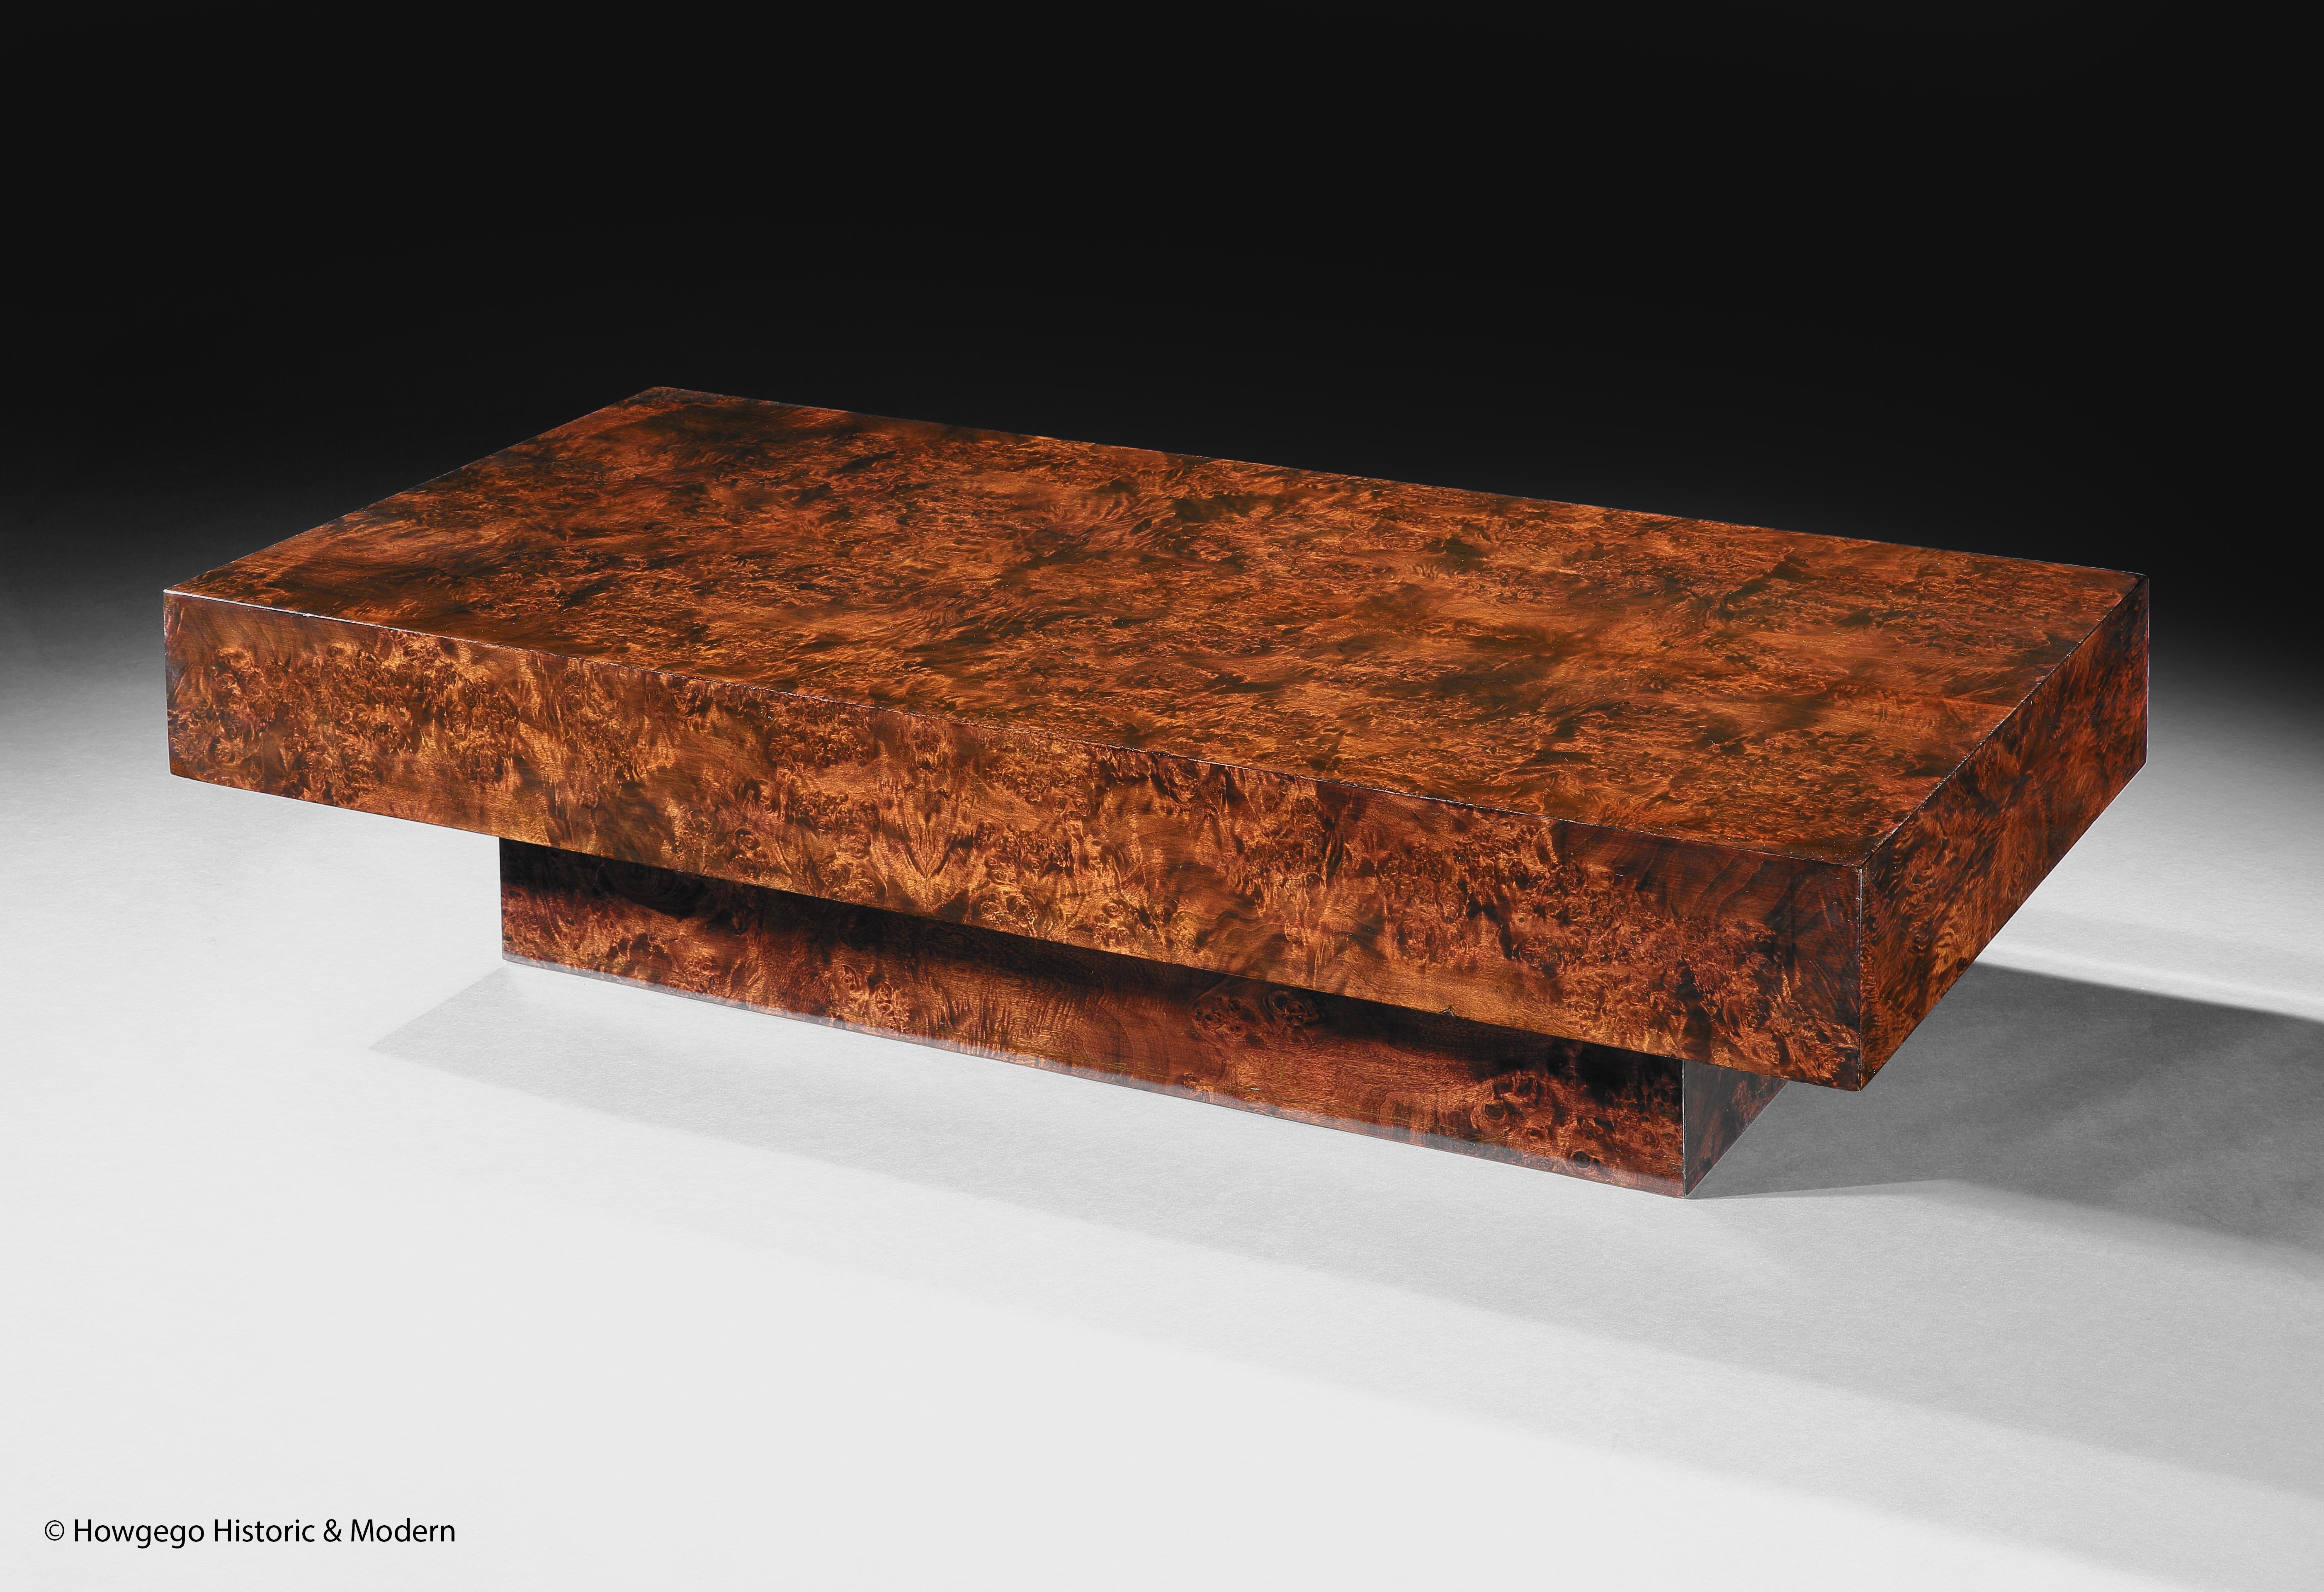 Italian design in manner of Aldo Tura & Willy Rizzo: mulberry floating platform base low/coffee table, 1960’s 

The combination of Modernist design with the densely grained mulberry veneers creates a refreshing, informal, warm and sophisticated